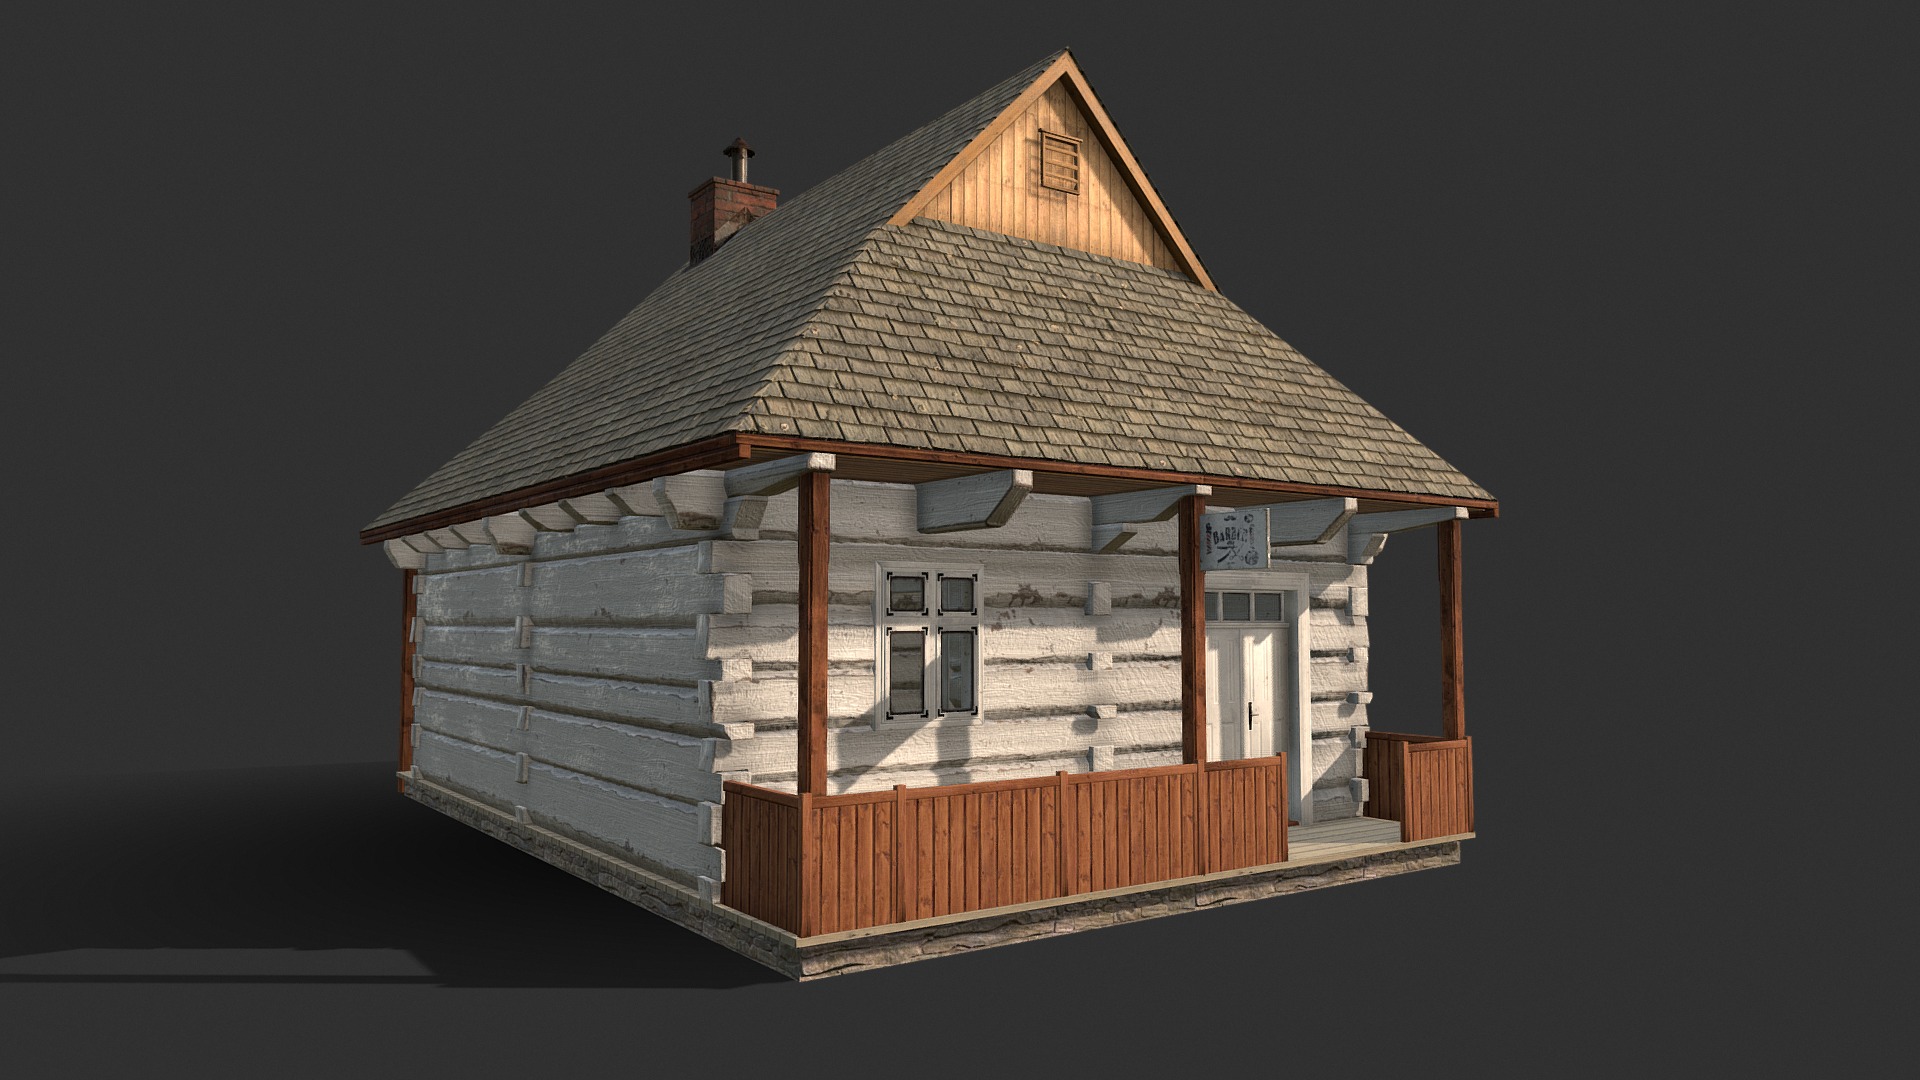 3D model Barber House  – Slav Architecture - This is a 3D model of the Barber House  - Slav Architecture. The 3D model is about a small wooden house.